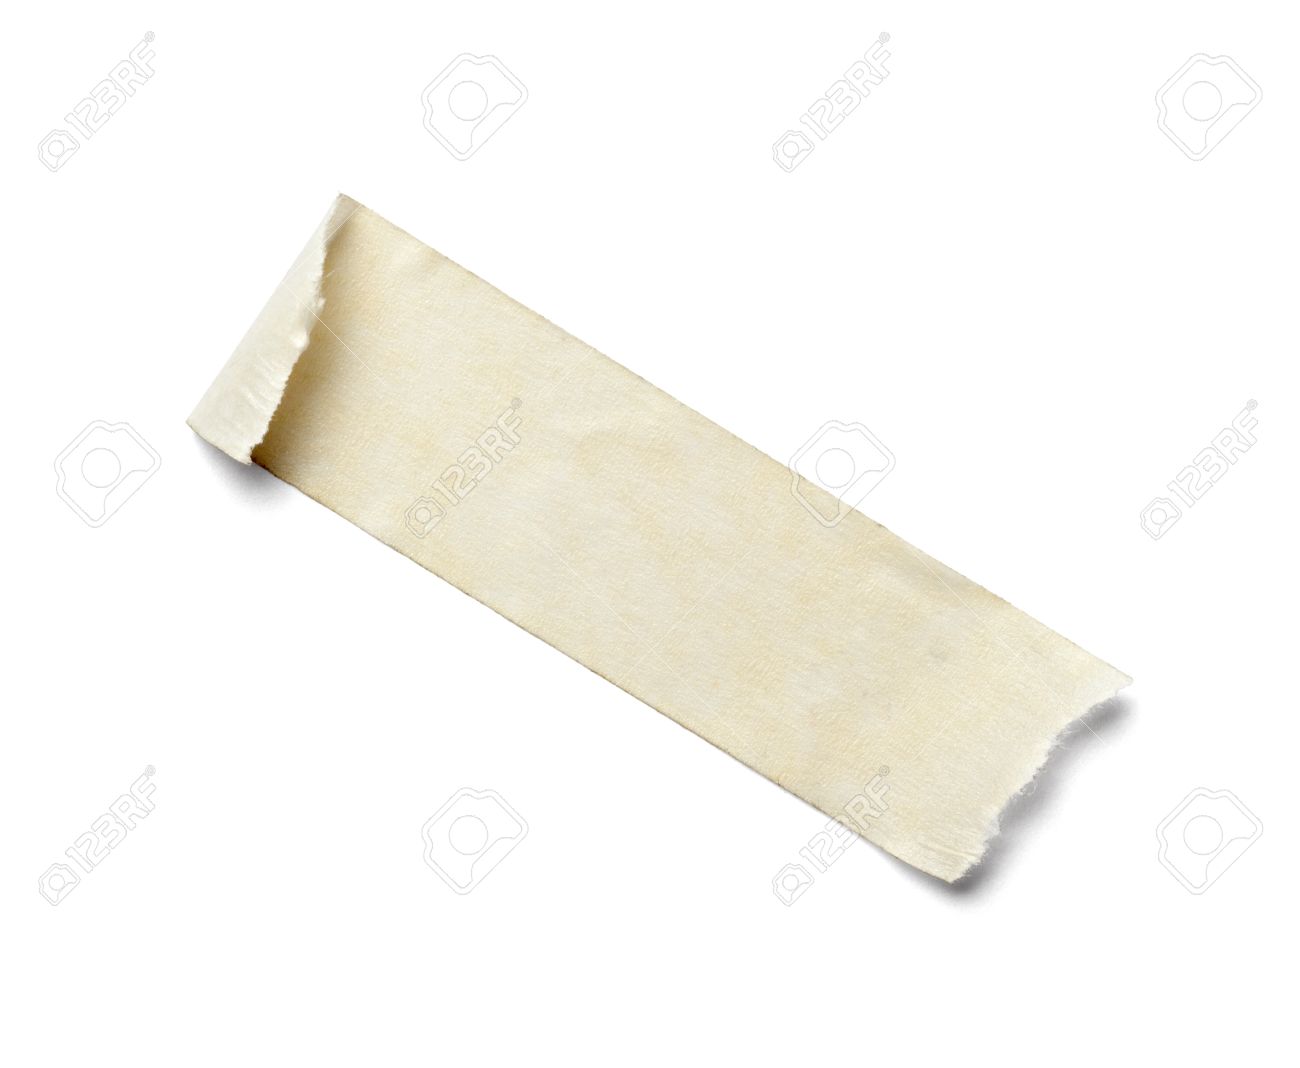 Close Up Of An Adhesive Tape On White Background With Clipping